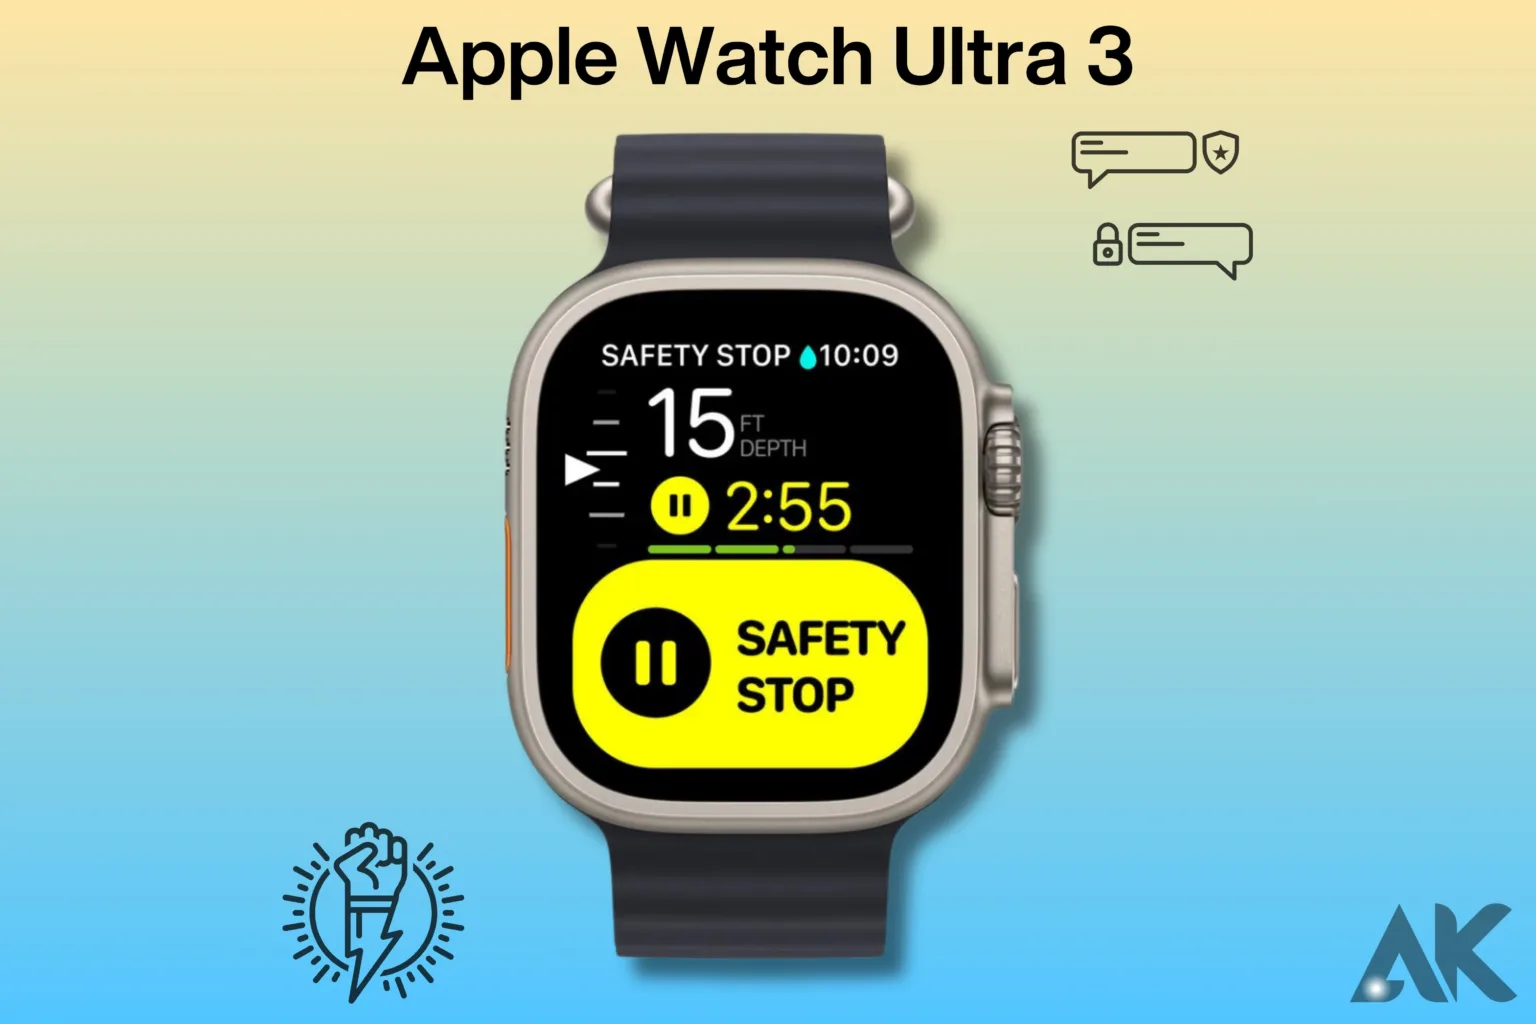 Apple Watch Ultra 3 features